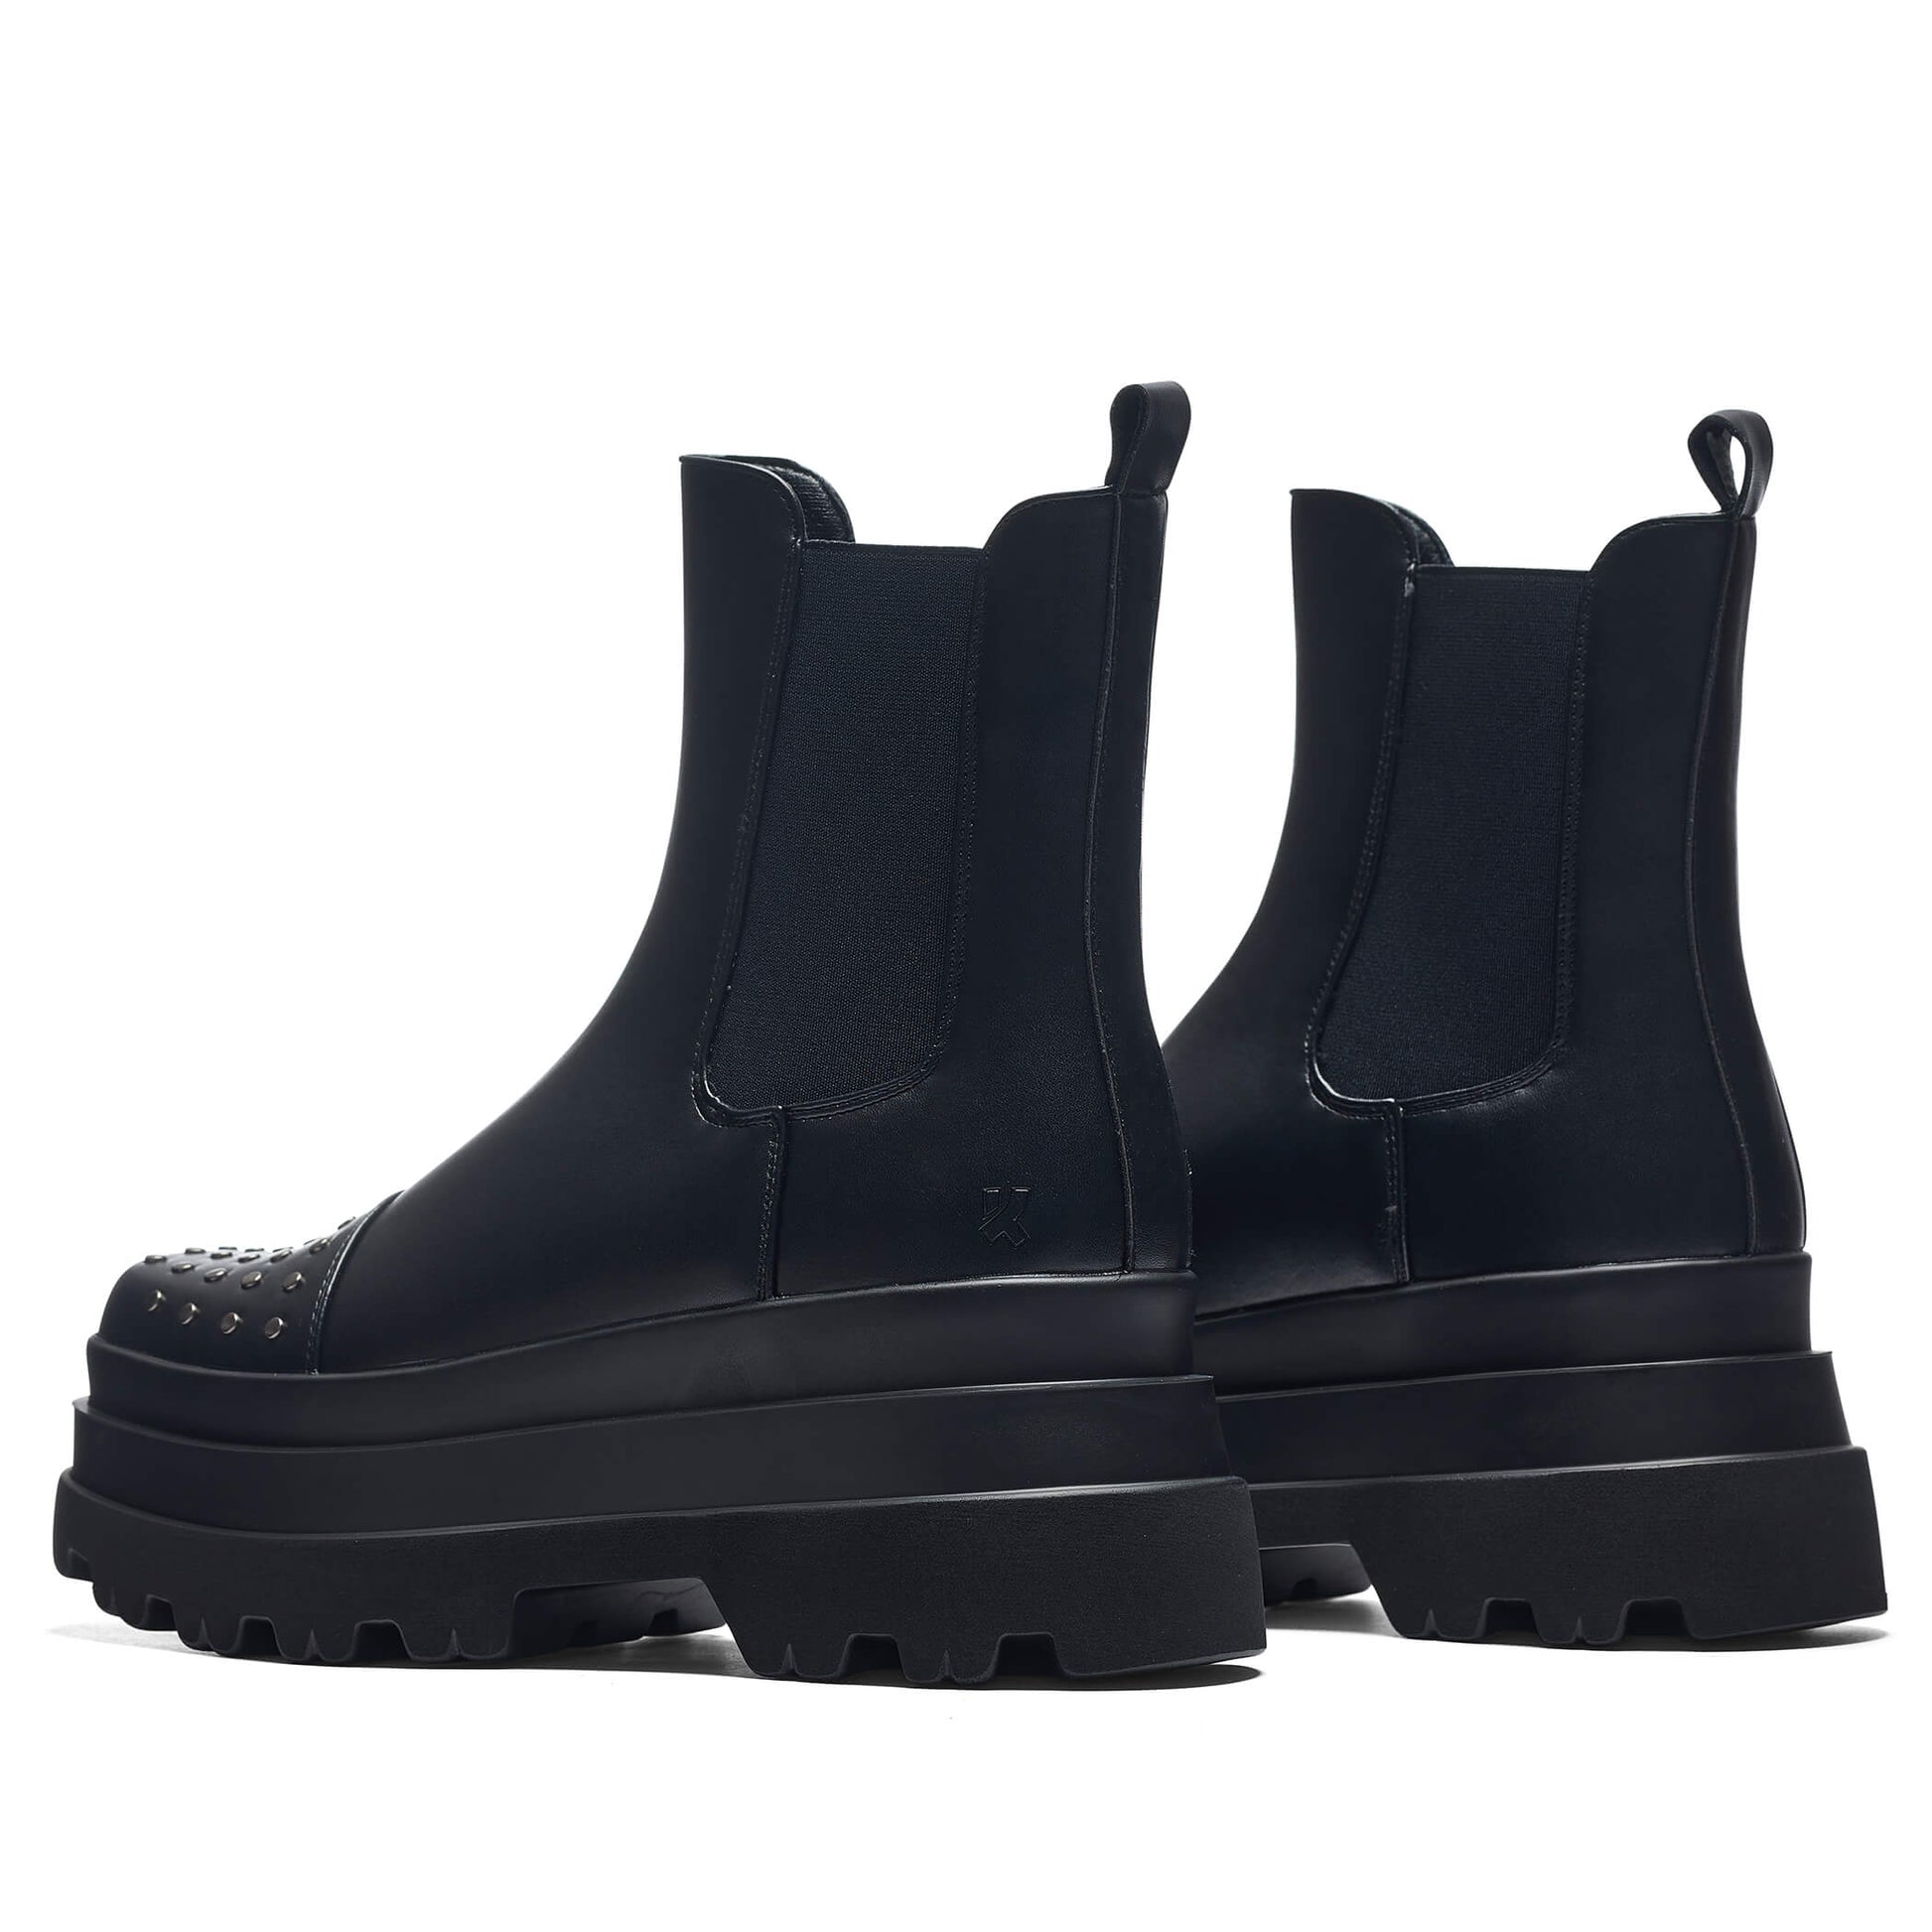 Silence Studded Trident Chelsea Boots - Black - Ankle Boots - KOI Footwear - Black - Back View